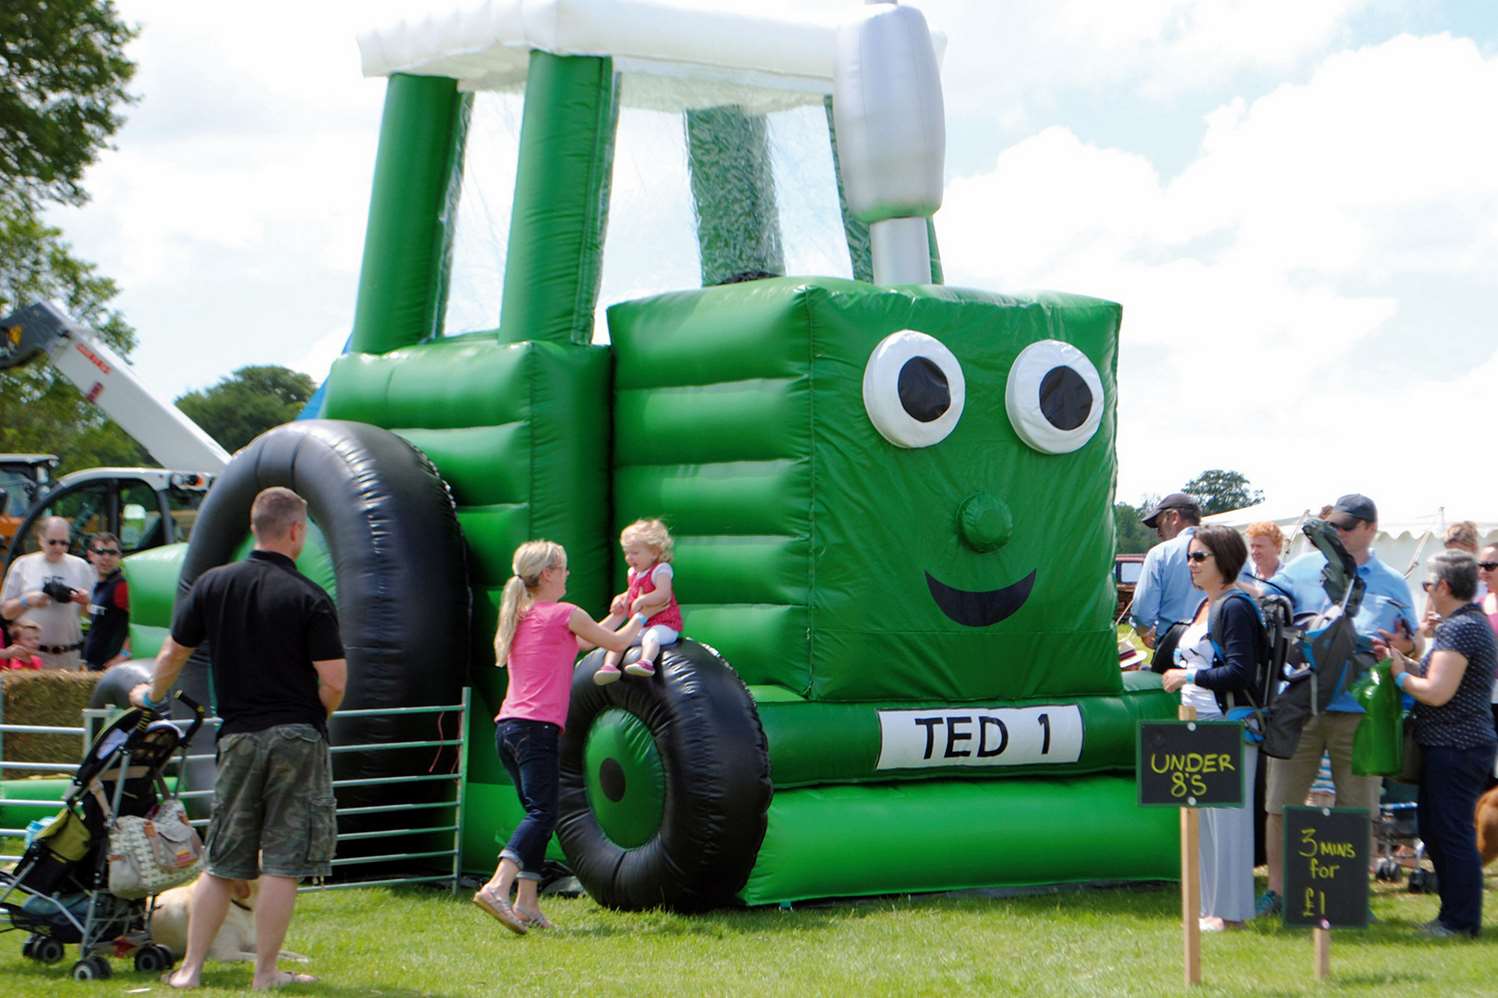 Tractor Ted will be at the Kent County Show